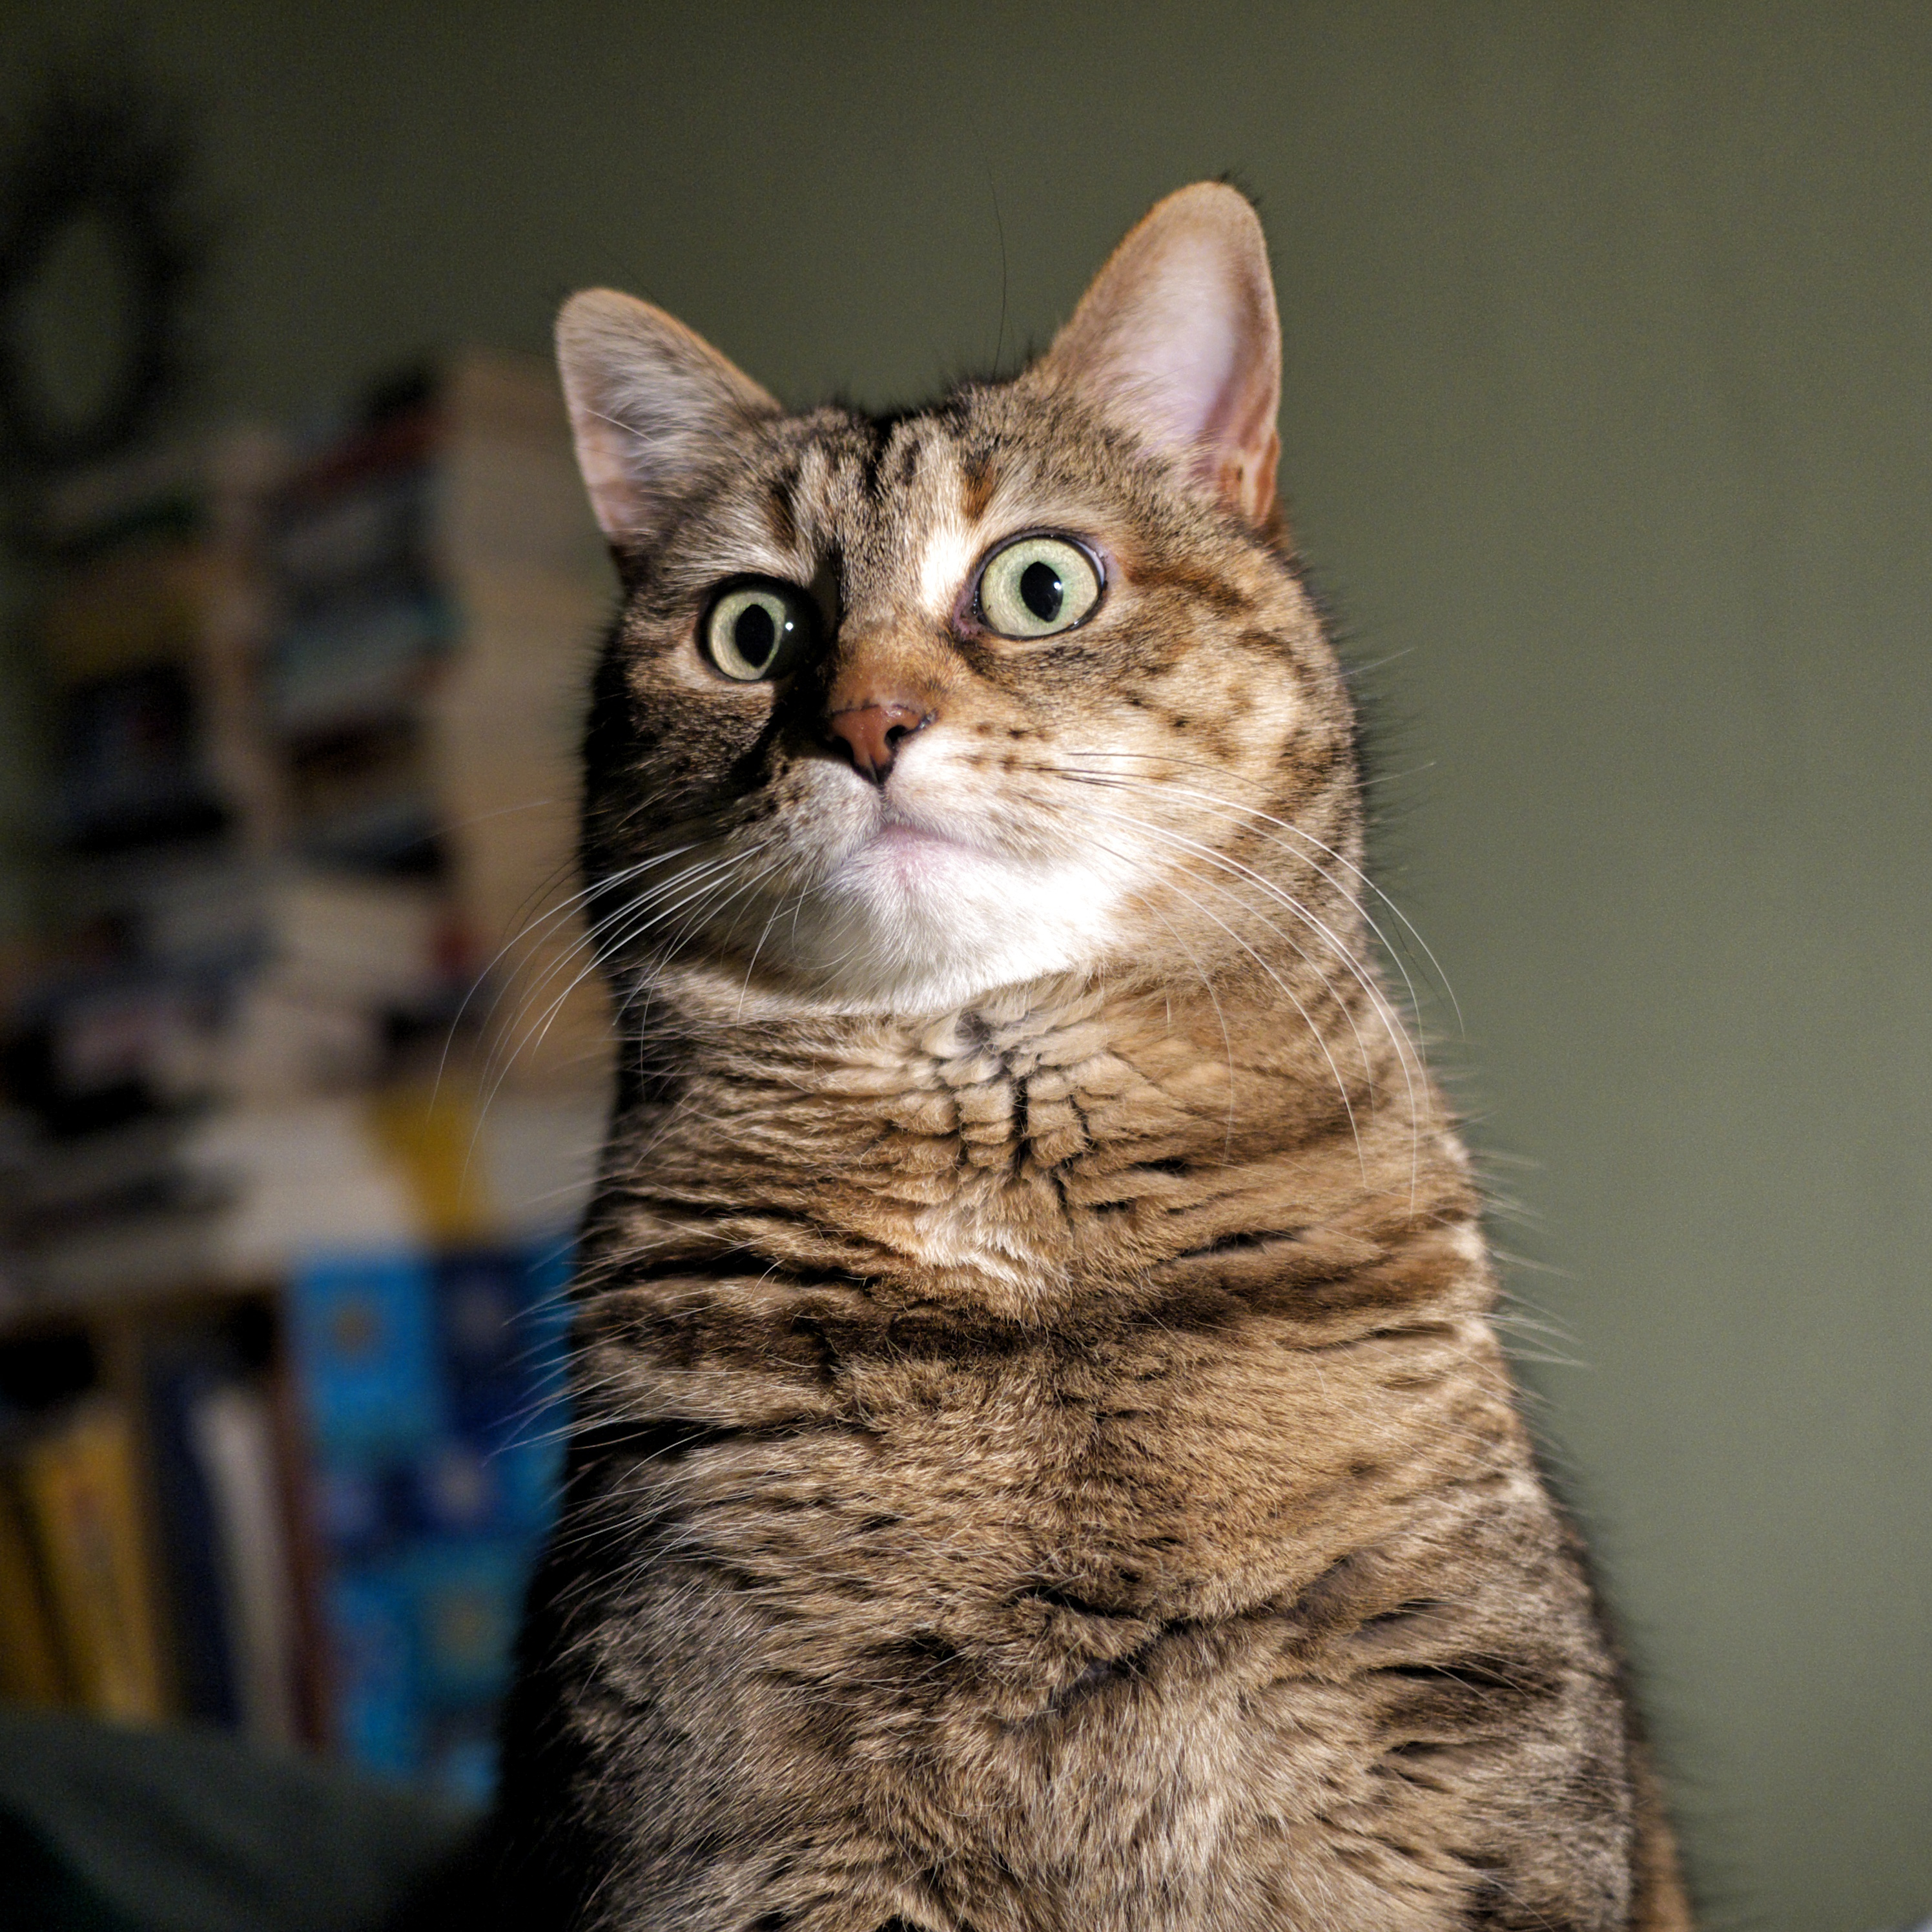 Tabby cat sitting, looking to the side with wide eyes, indoors with a bookshelf background